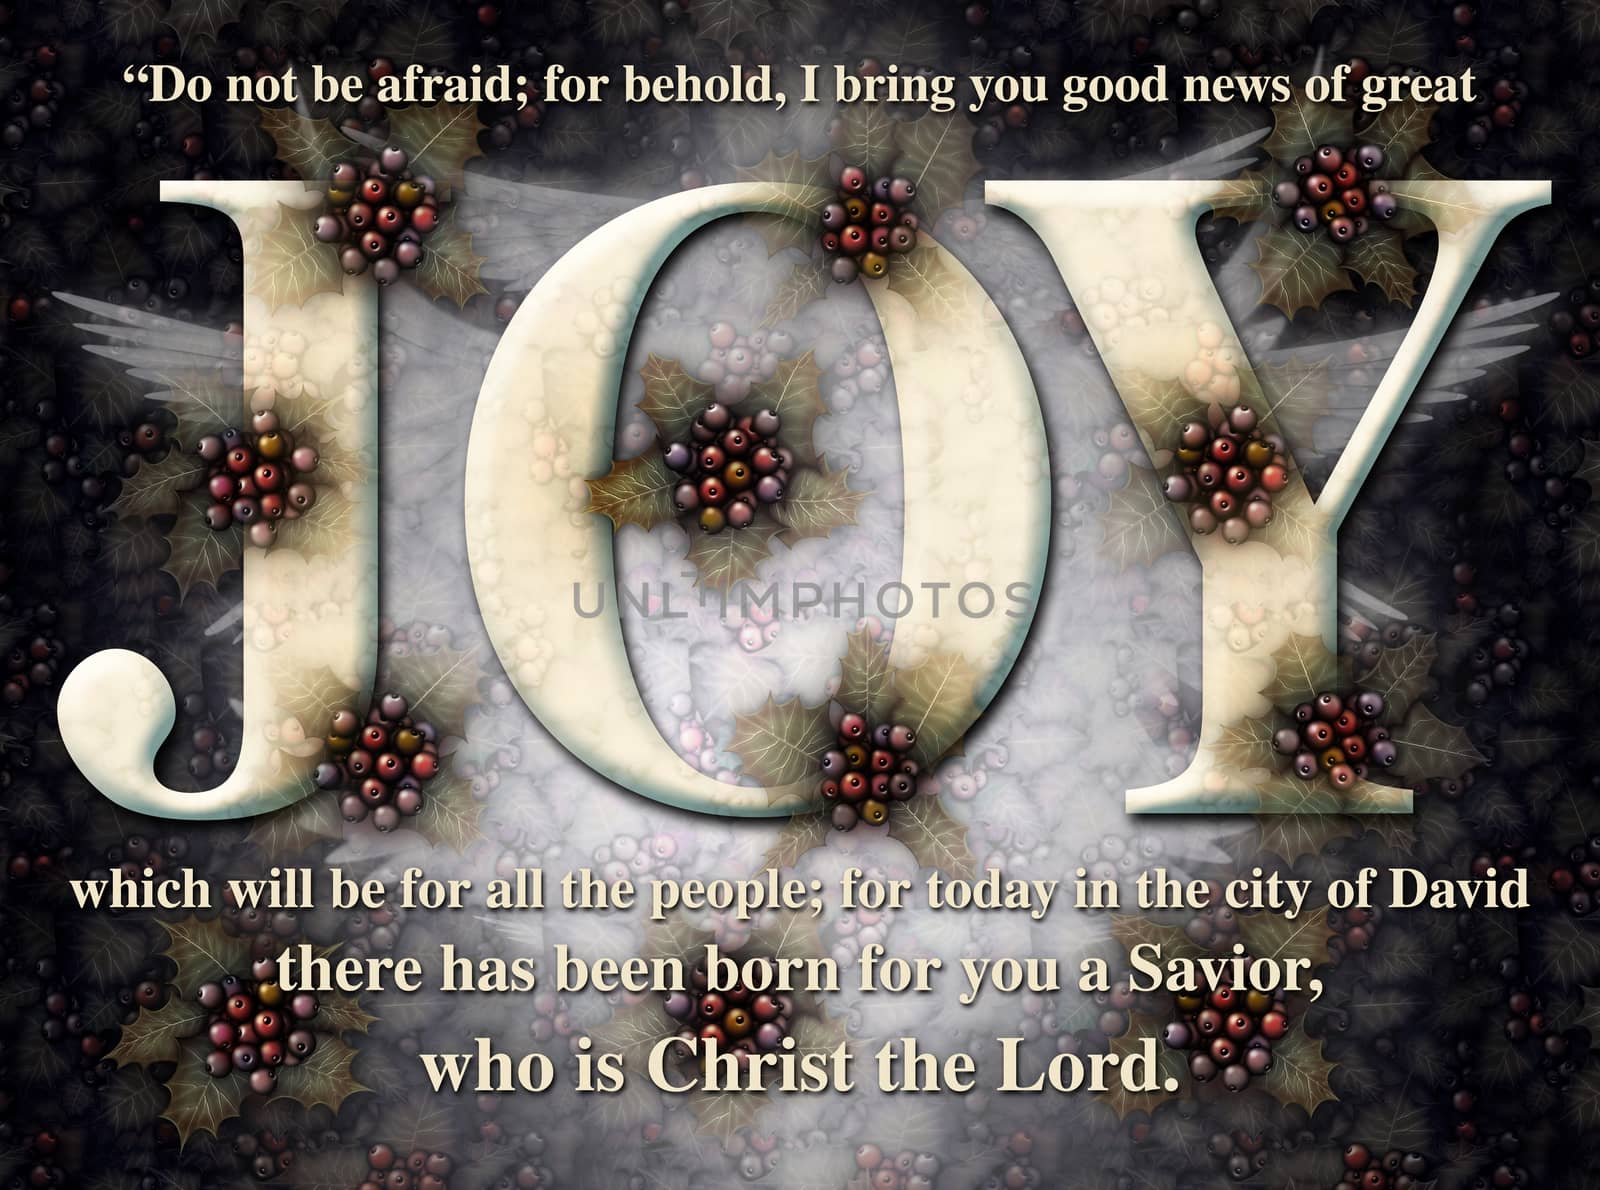 Digital illustration with the word Joy as the key feature, decorated with Holly, Angel wings, and a bible verse announcing the birth of Christ.